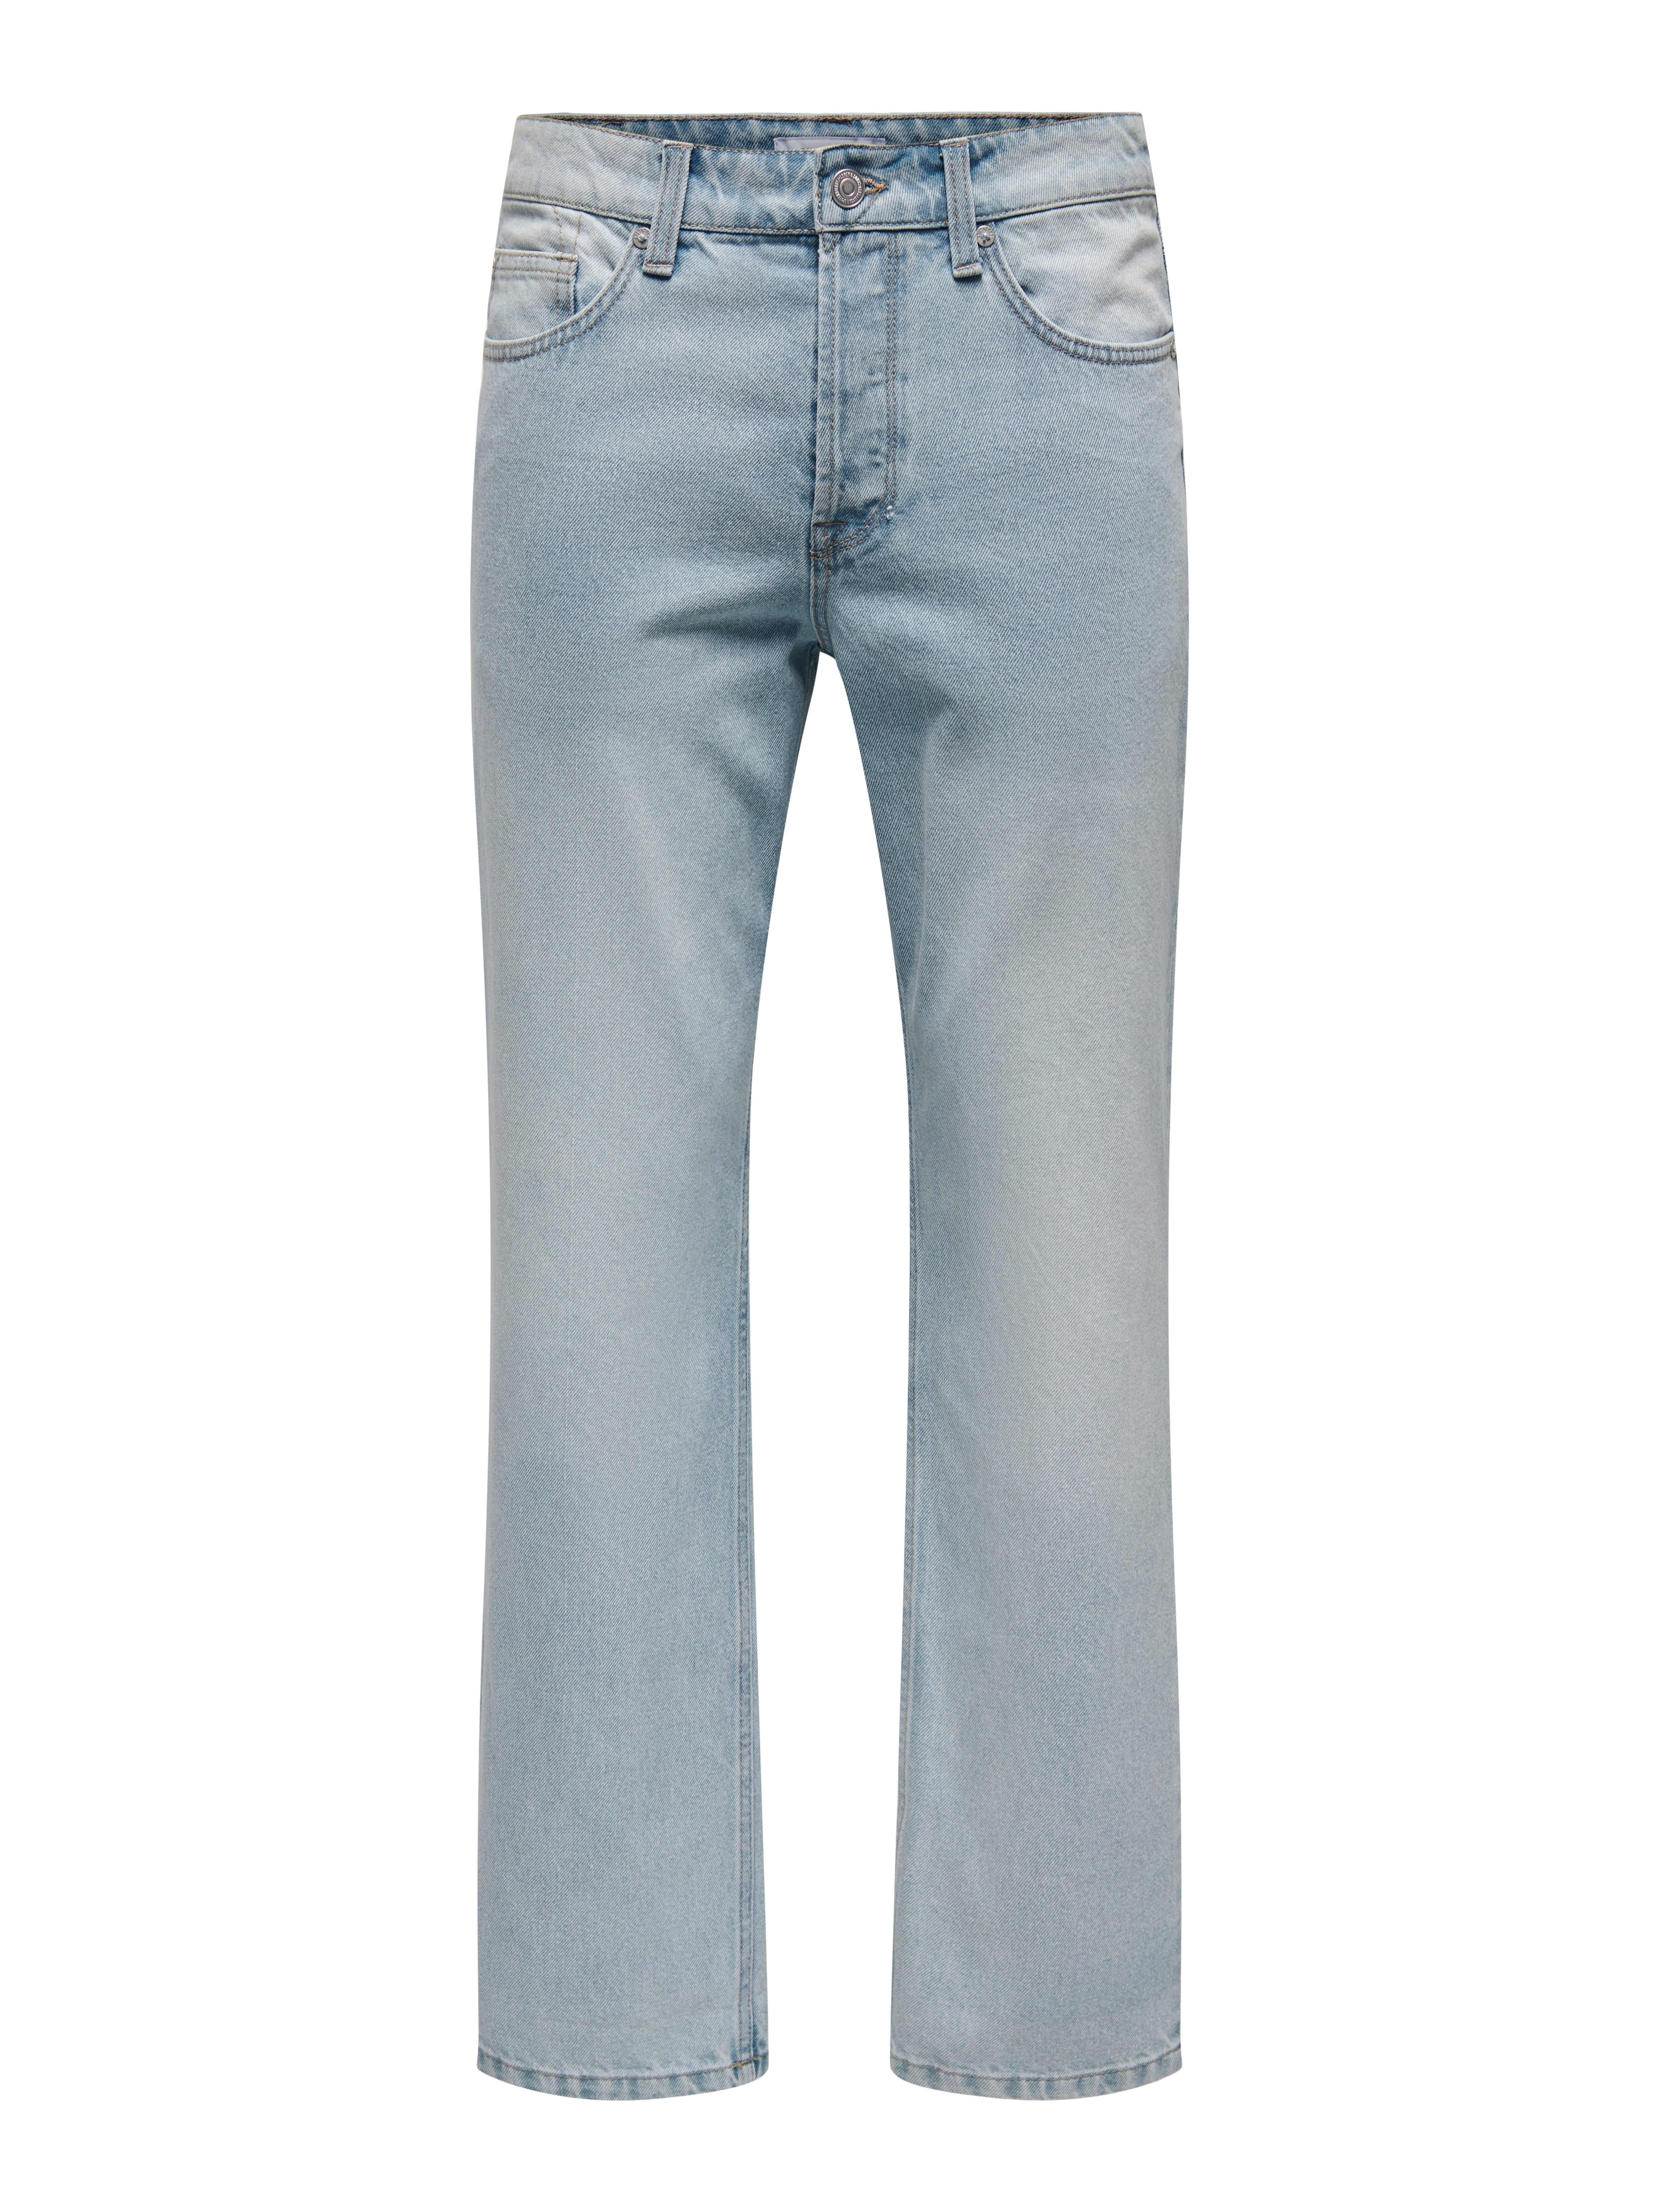 ONSEDGE ORG. STRAIGHT 7901 EY BOX JEANS | Light Blue | ONLY & SONS®